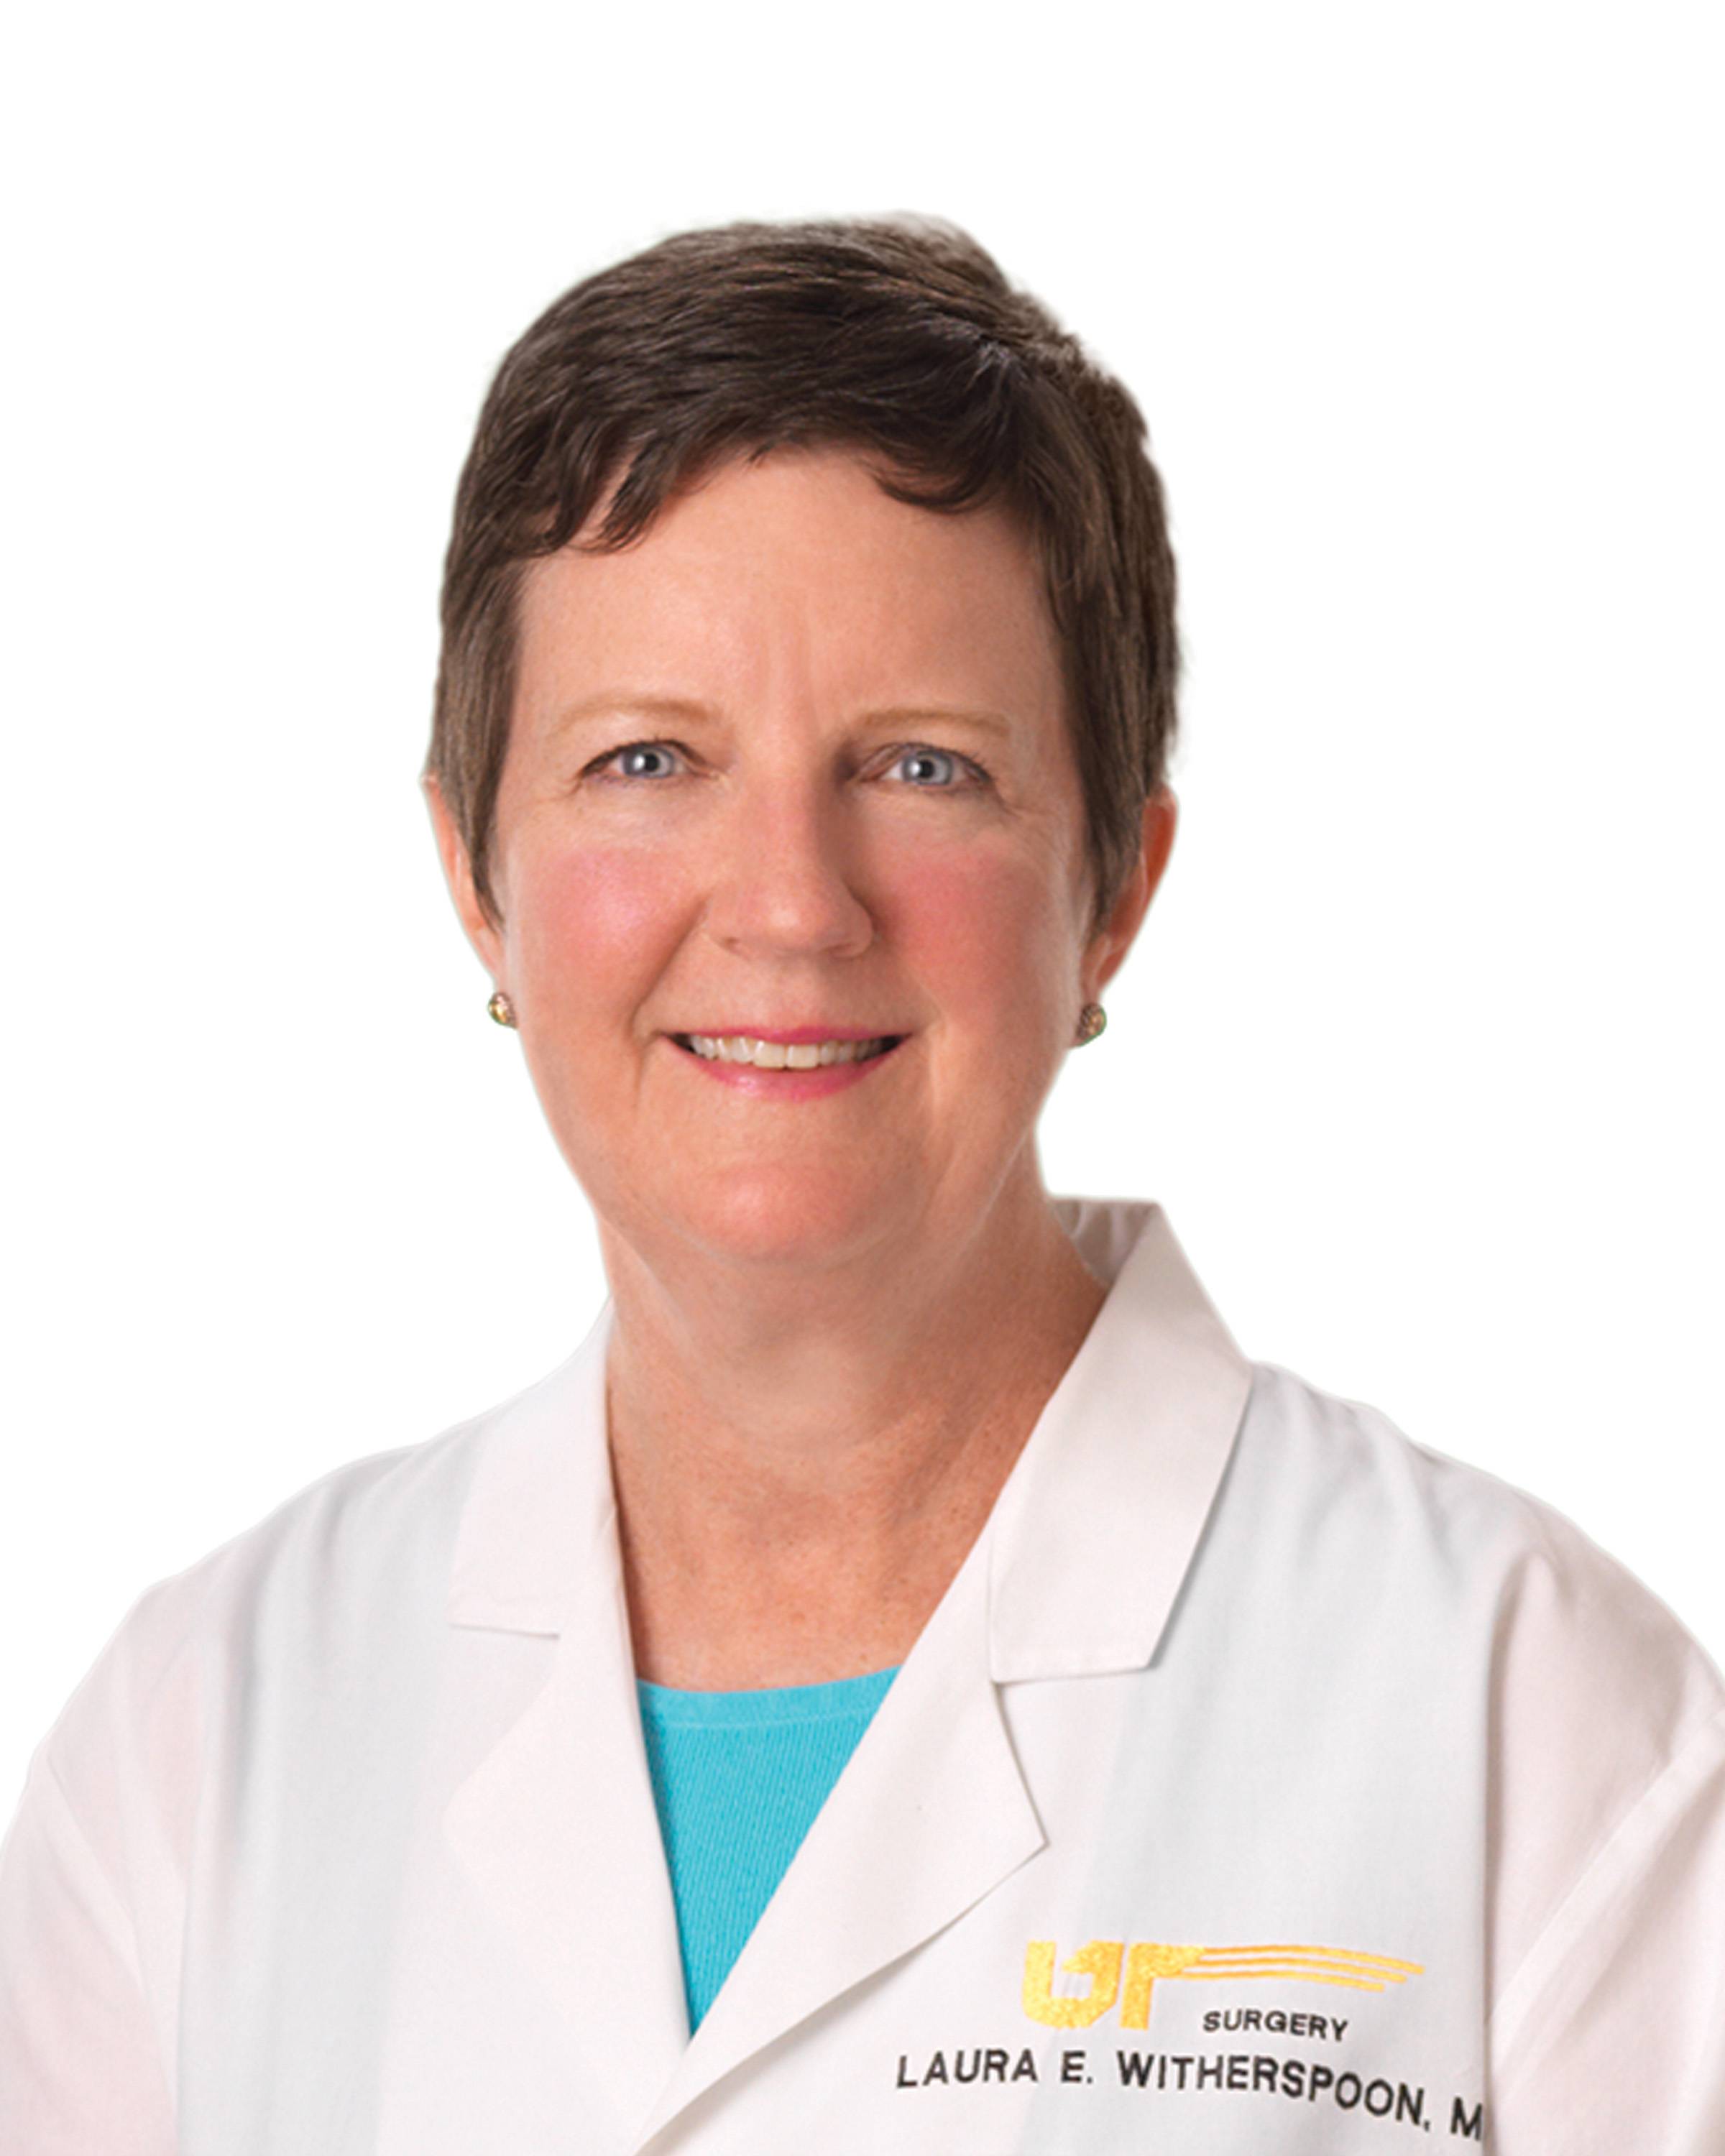 Laura Witherspoon, MD, FACS, Faculty, Surgery Residency